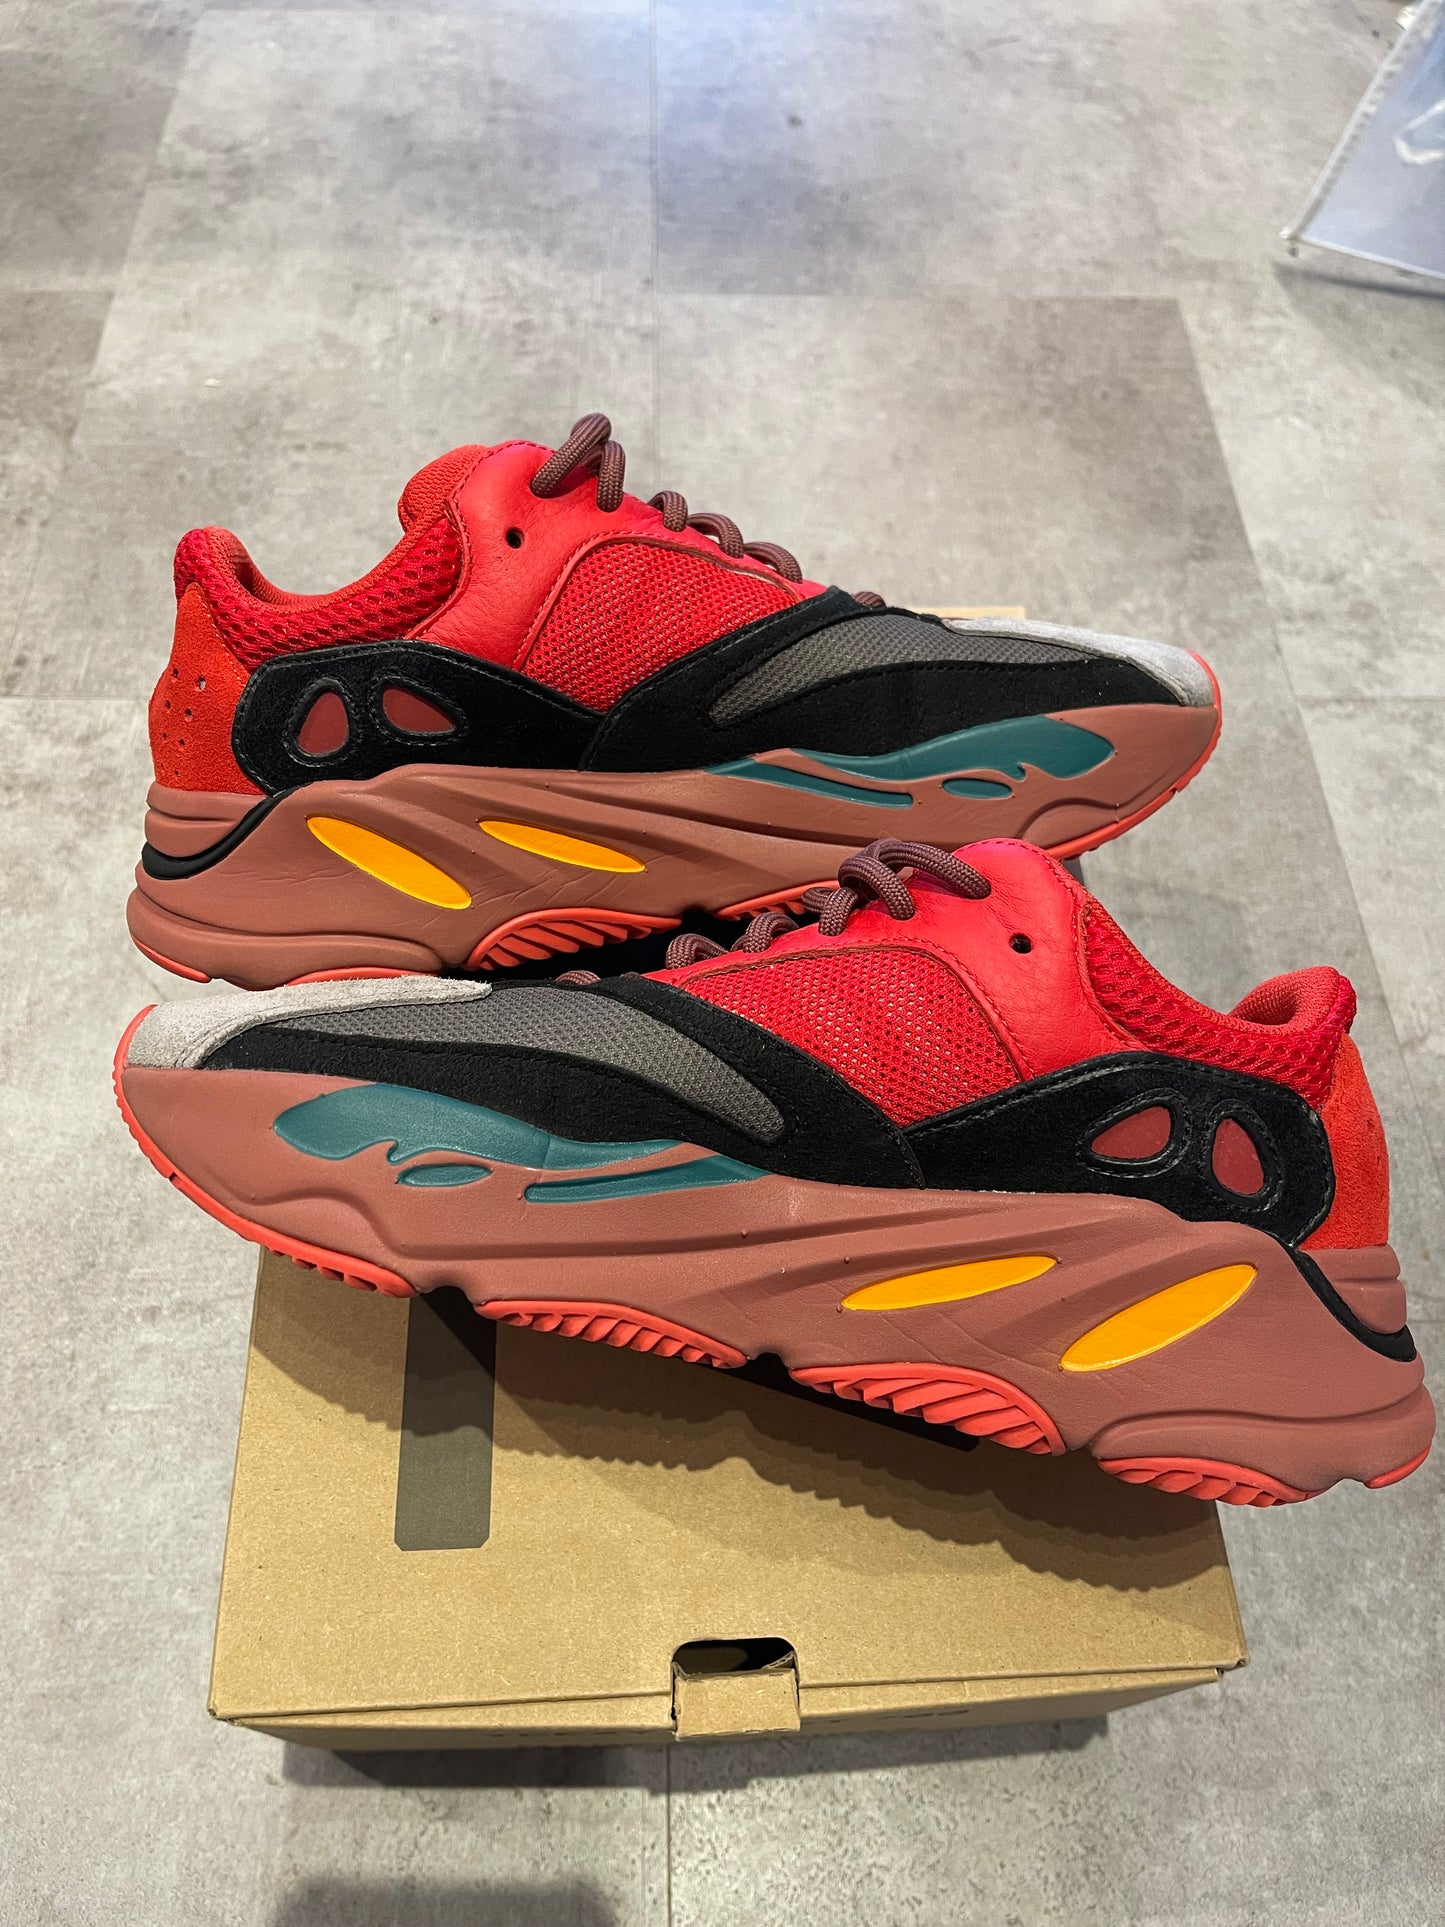 Adidas Yeezy Boost 700 V1 Hi-Res Red (Preowned)